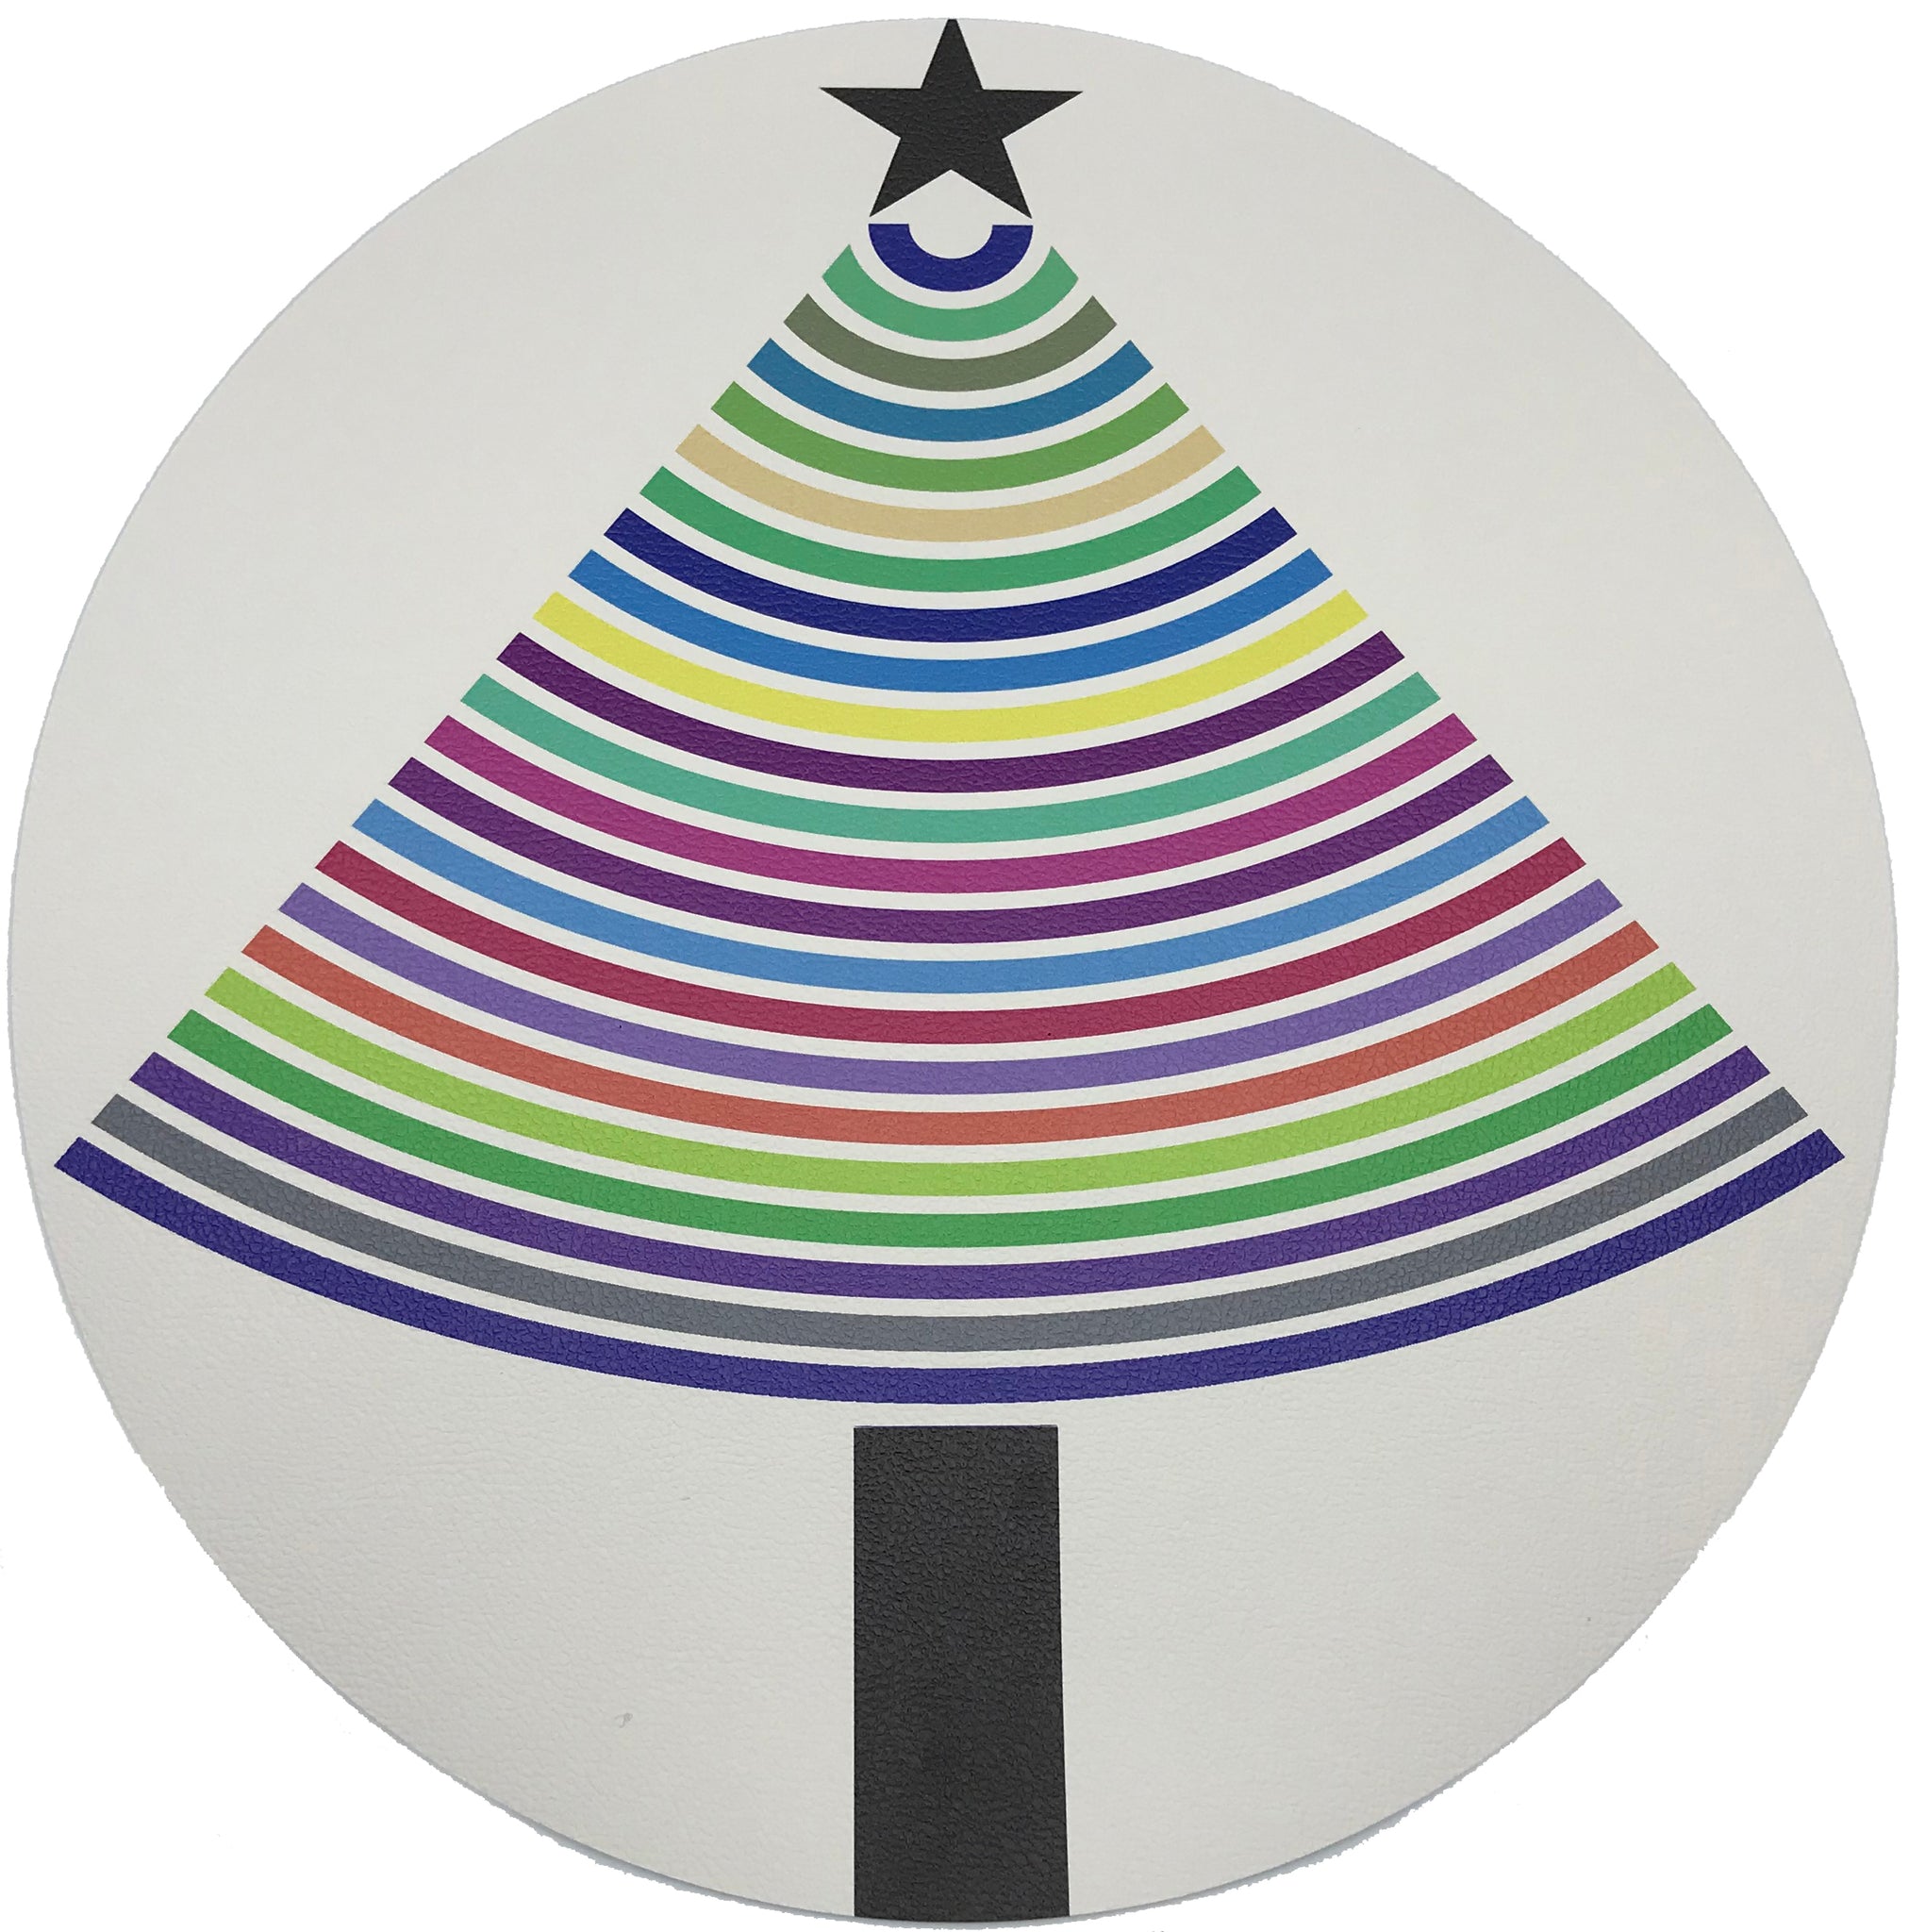 CHRISTMAS TREE BRIGHTS 16" ROUND PEBBLE PLACEMAT, SET OF 4 - nicolettemayer.com